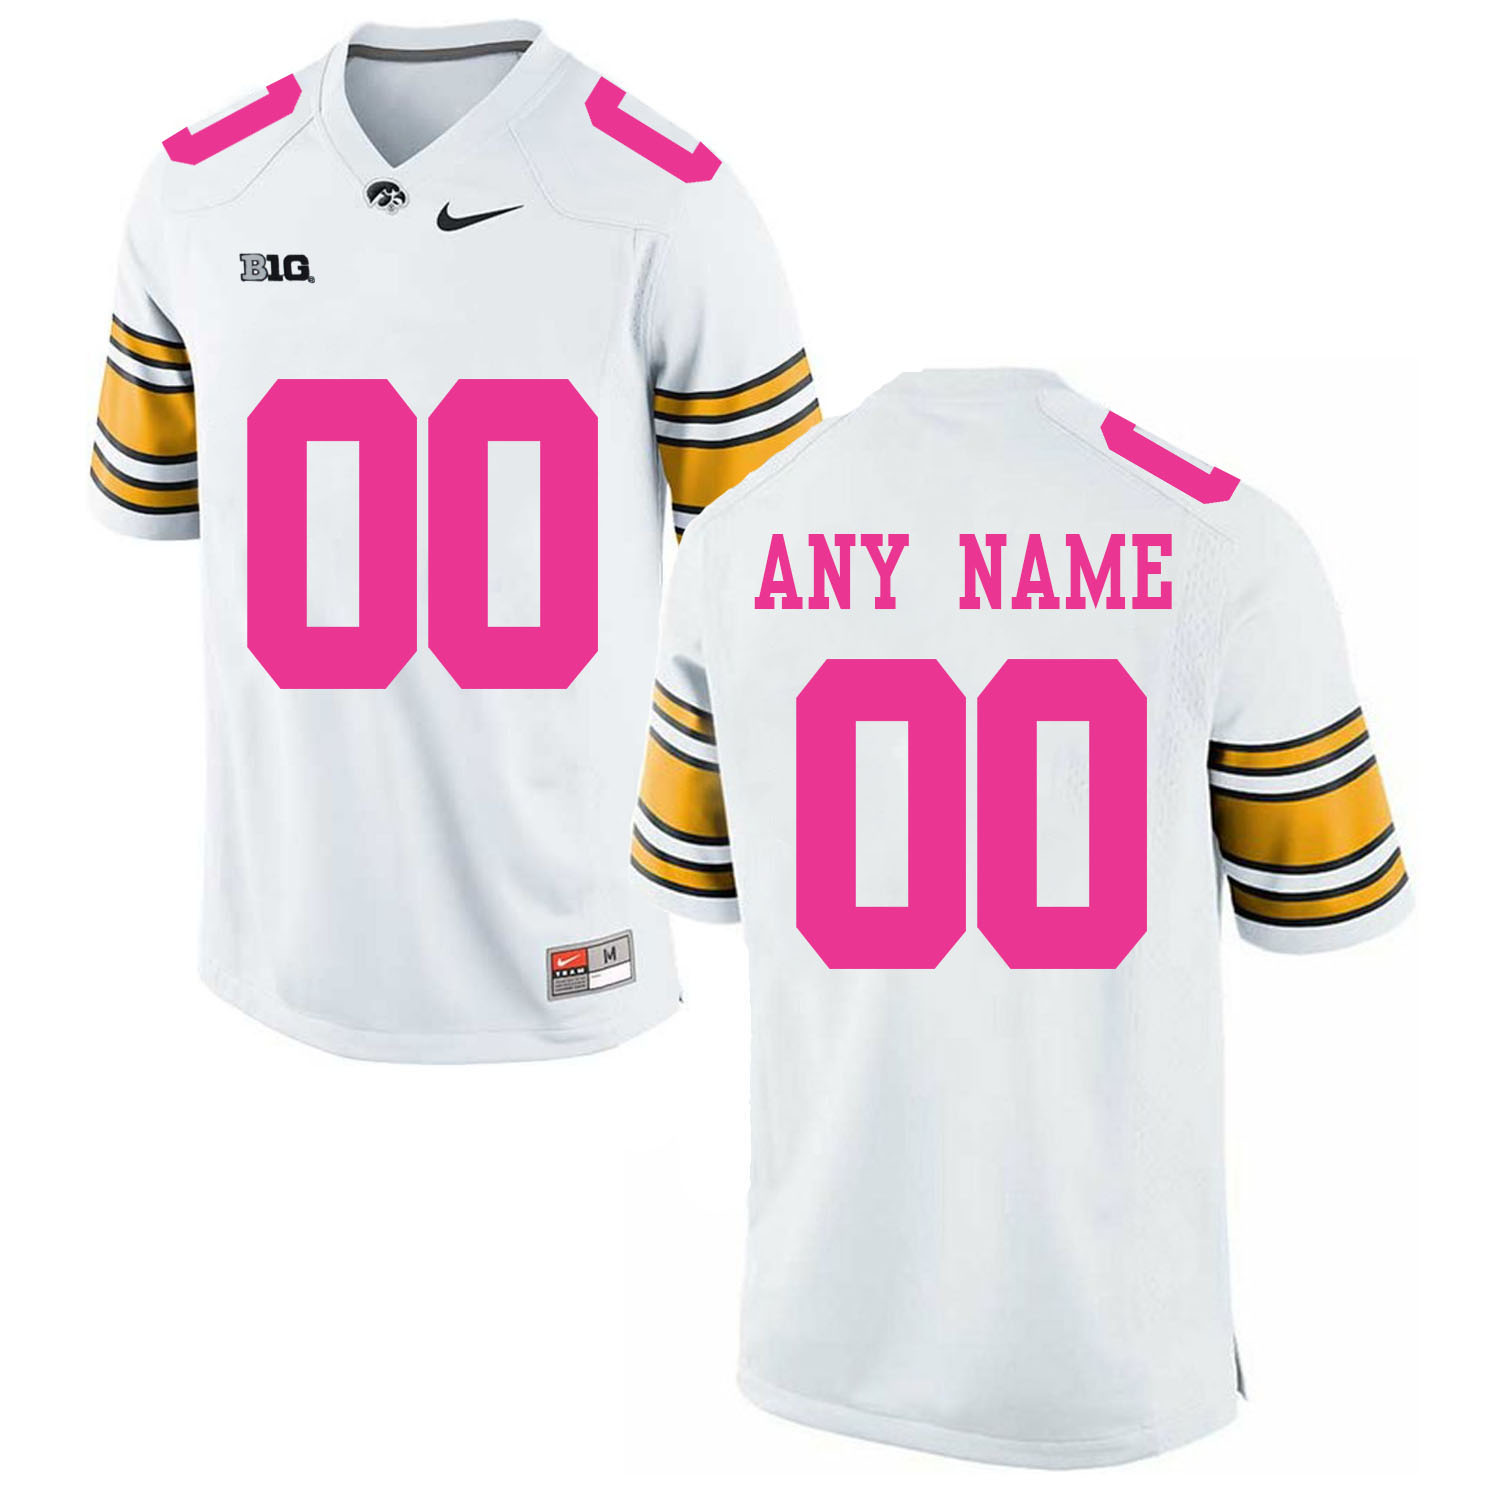 Iowa Hawkeyes White Men's Customized 2018 Breast Cancer Awareness College Football Jersey